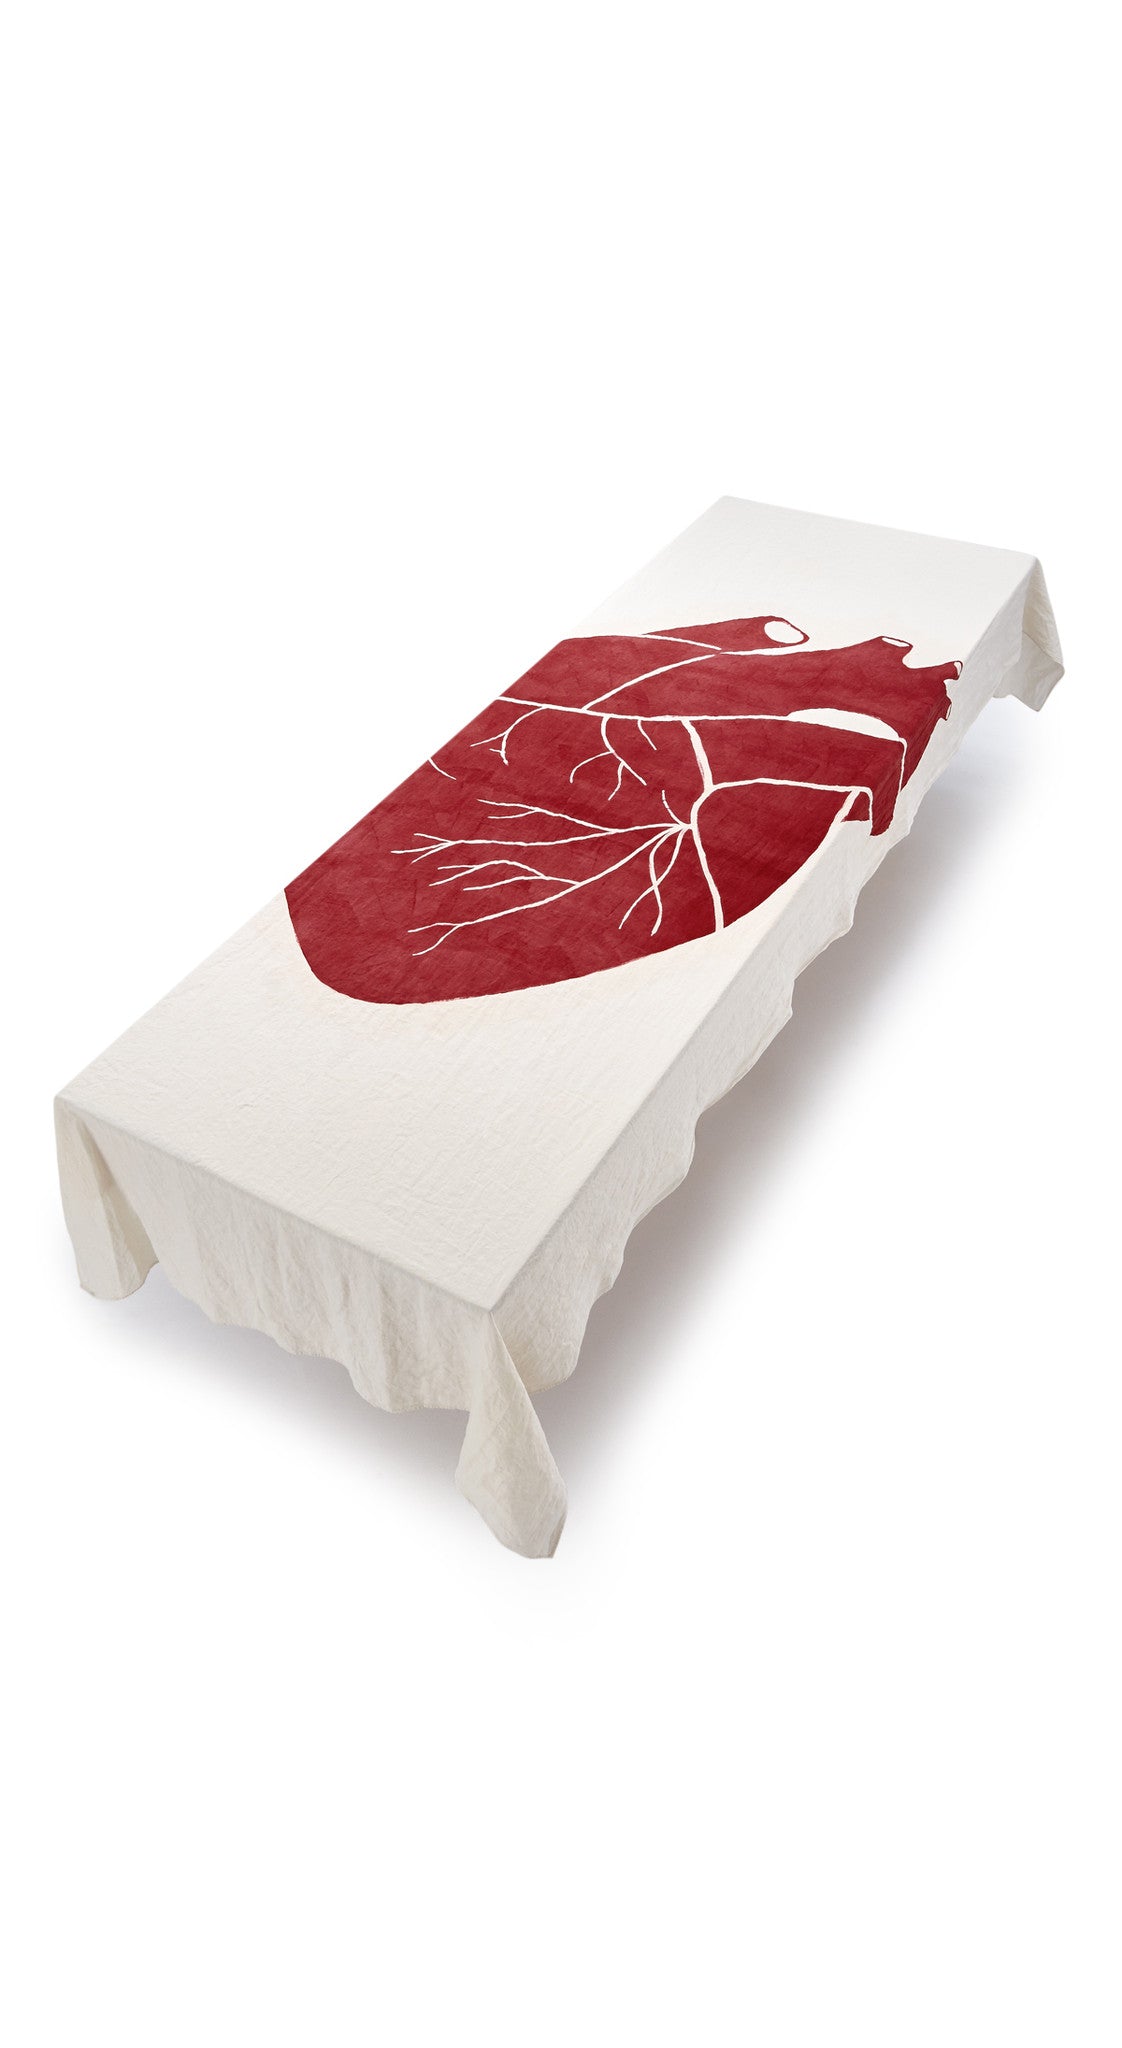 "The Heart Of The Home" Summerill & Bishop x Solange Linen Tablecloth